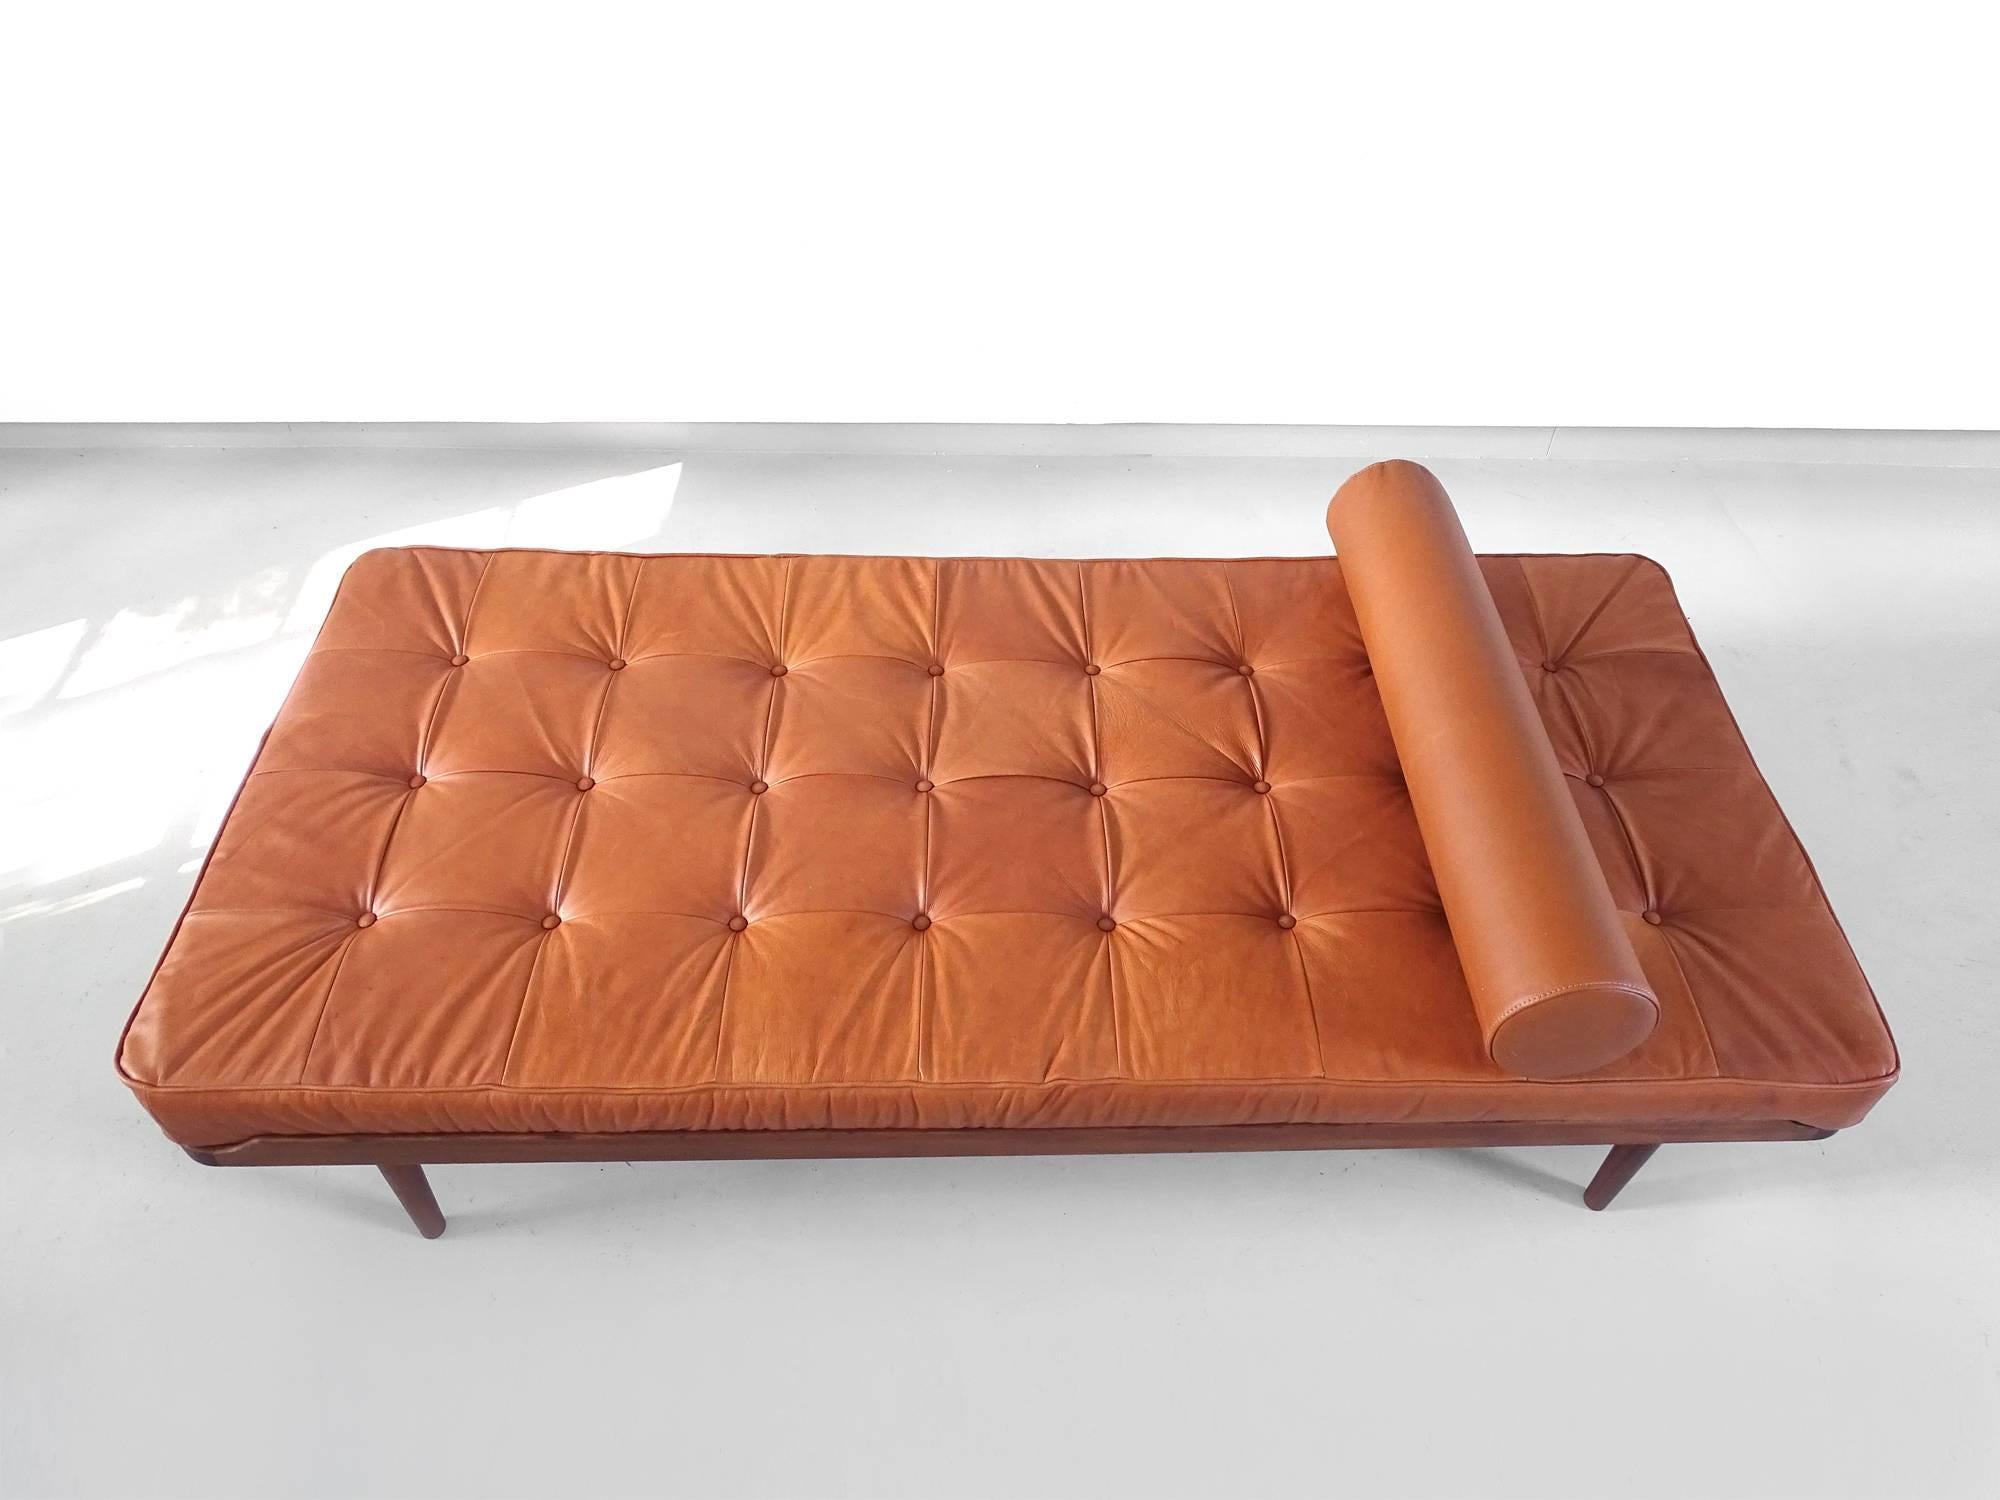 Mid-Century Modern Grete Jalk Daybed in Teak and Cognac Leather for P. Jeppesen, Denmark, 1960 For Sale